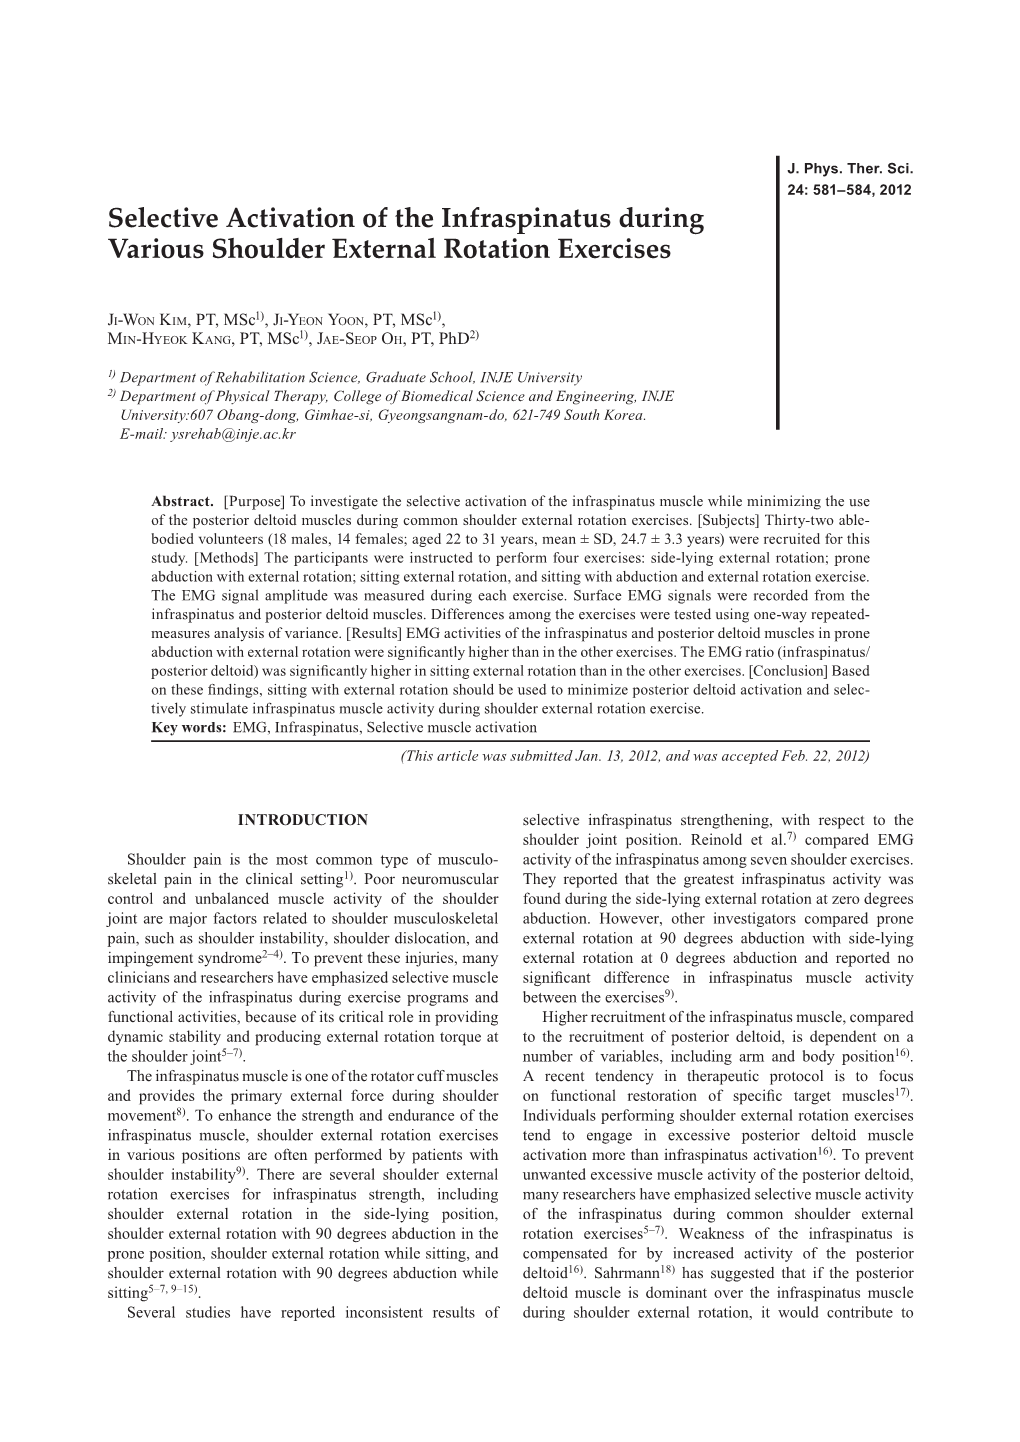 Selective Activation of the Infraspinatus During Various Shoulder External Rotation Exercises